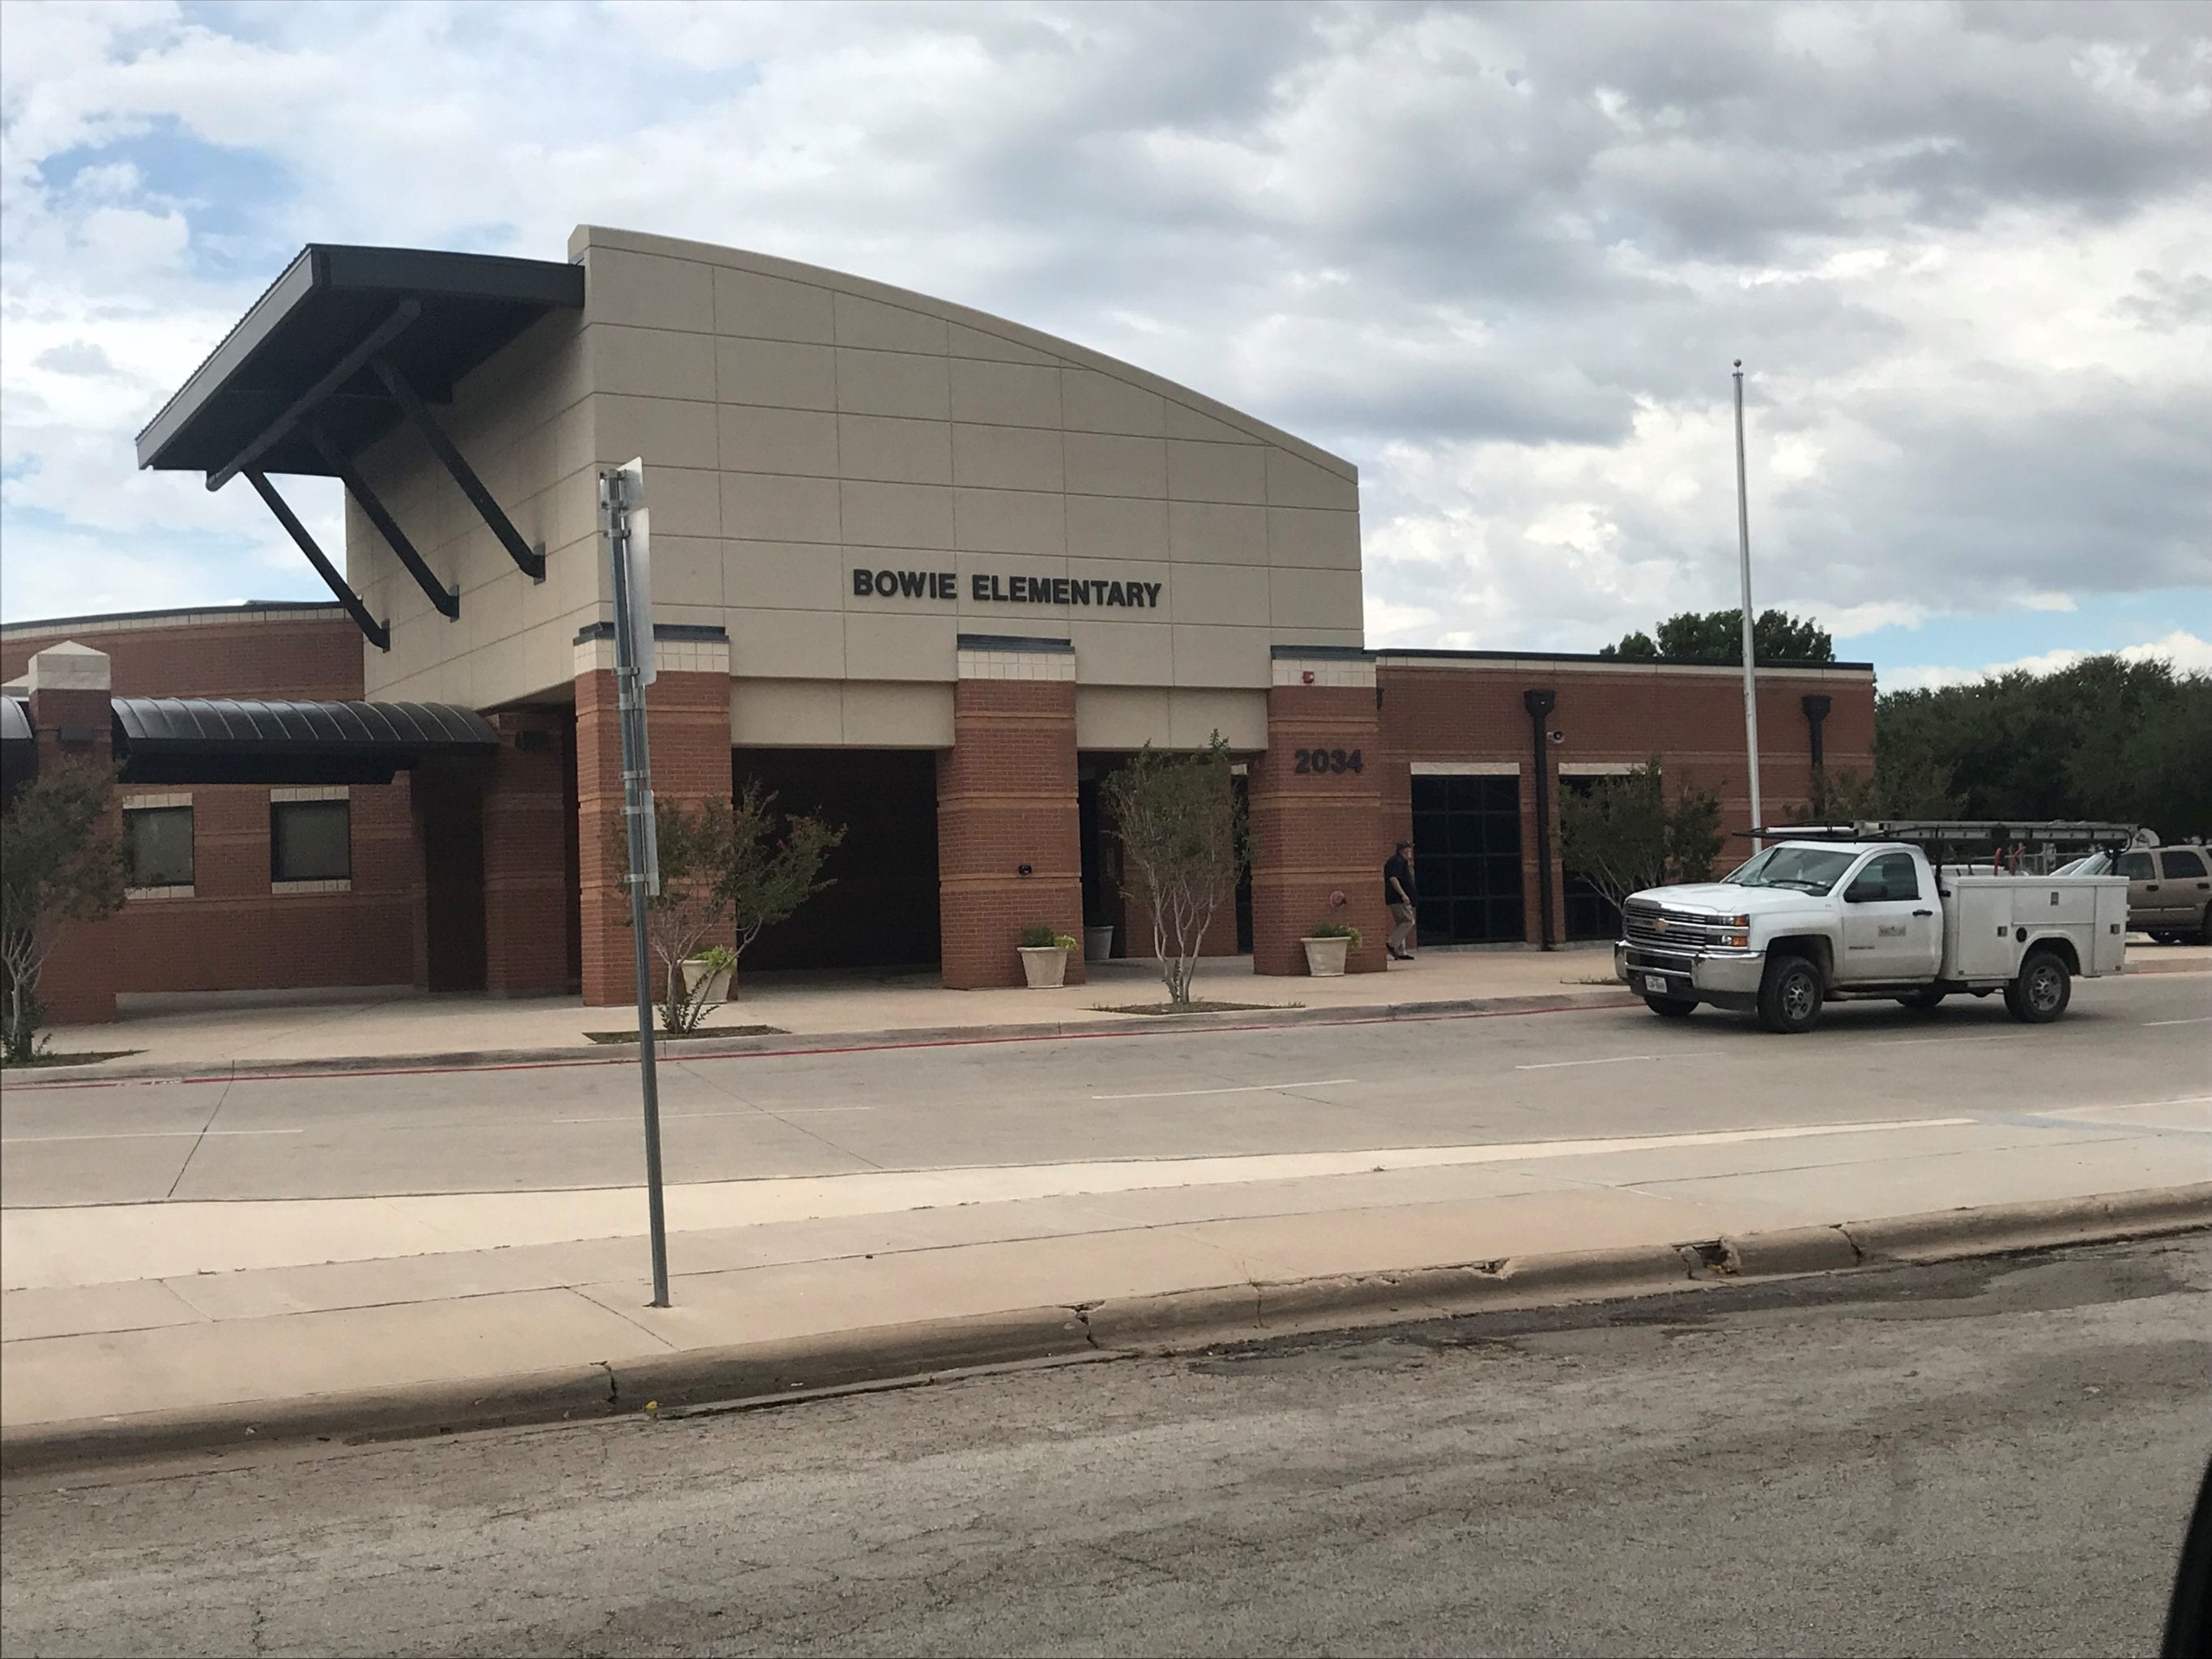 Bowie Elementary School built by RHS Contraction Services in Abilene, Texas